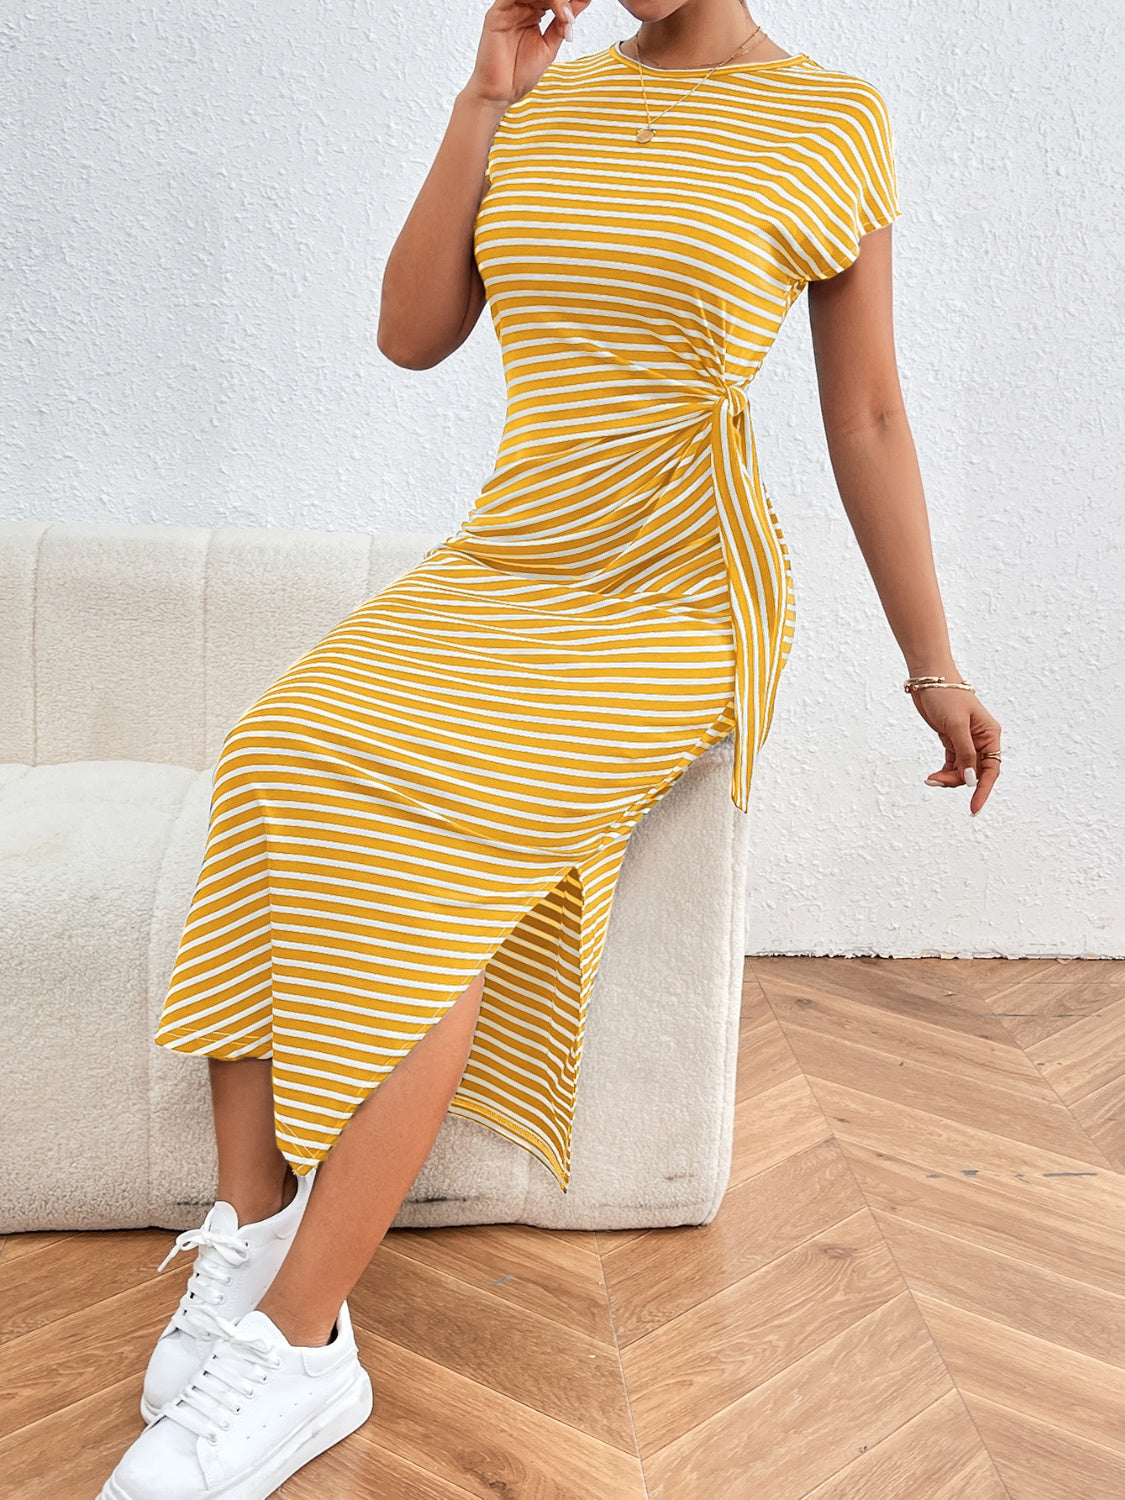 Tied Striped Round Neck Short Sleeve Tee Dress Dresses & Tops